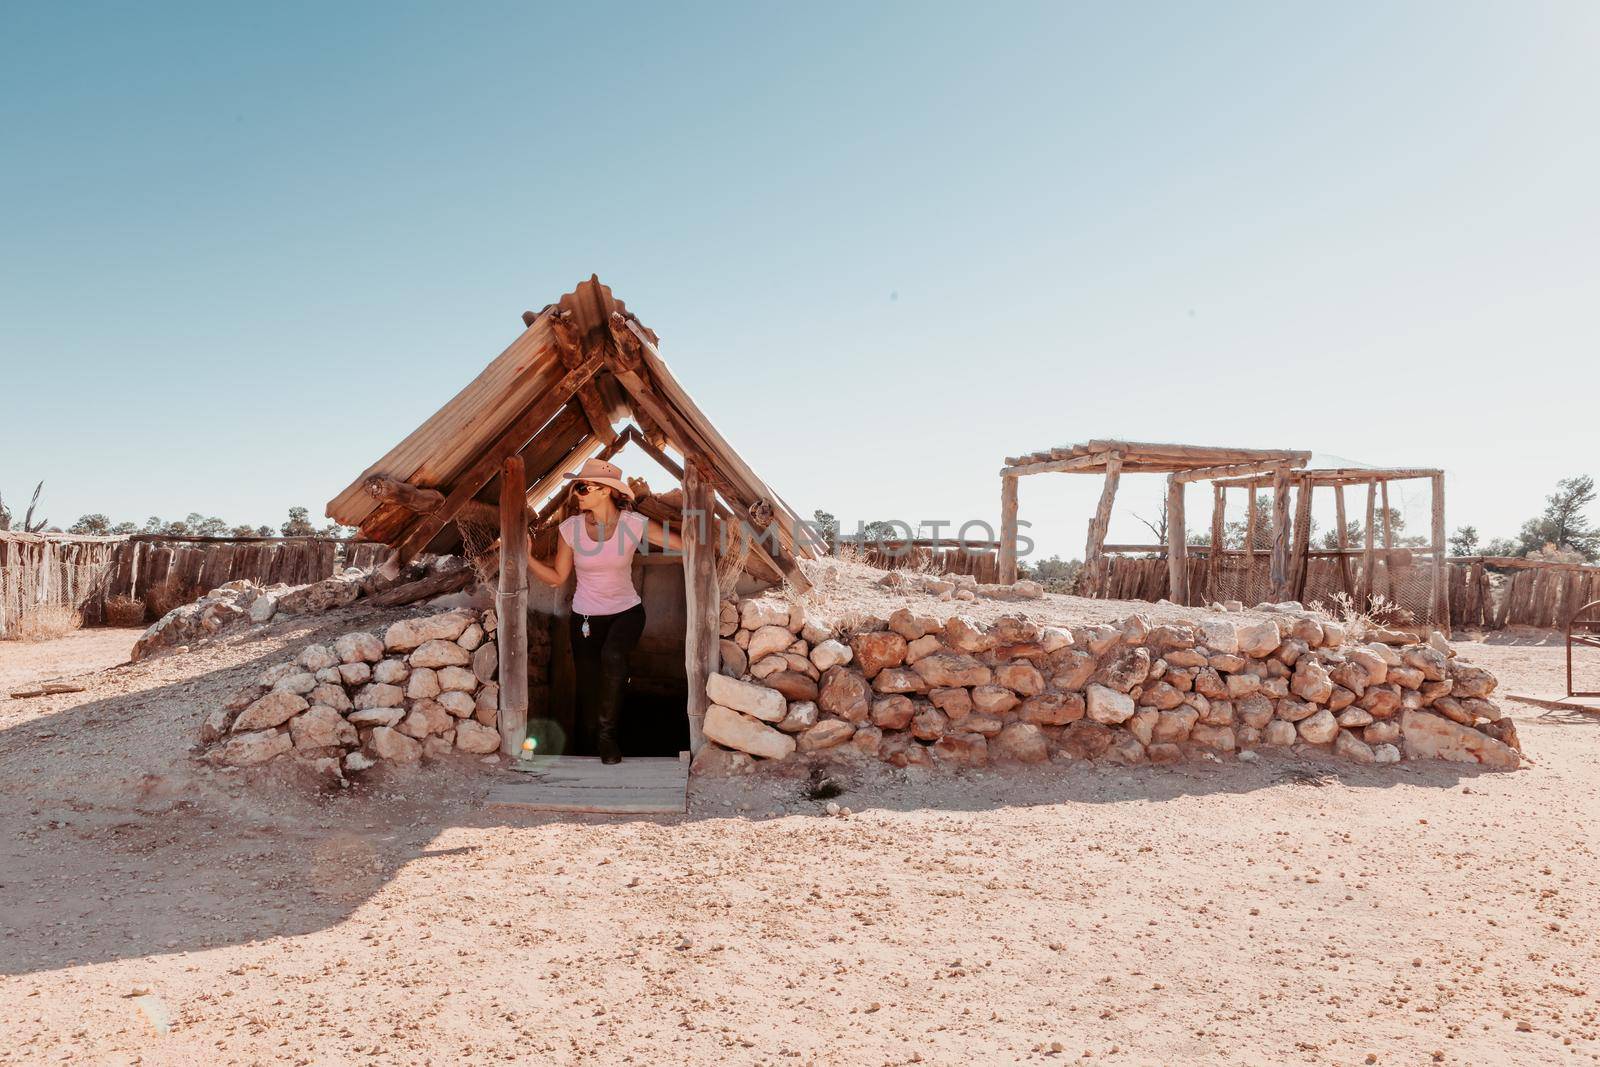 A woman emerging from a simple home built underground in desert Australia by lovleah